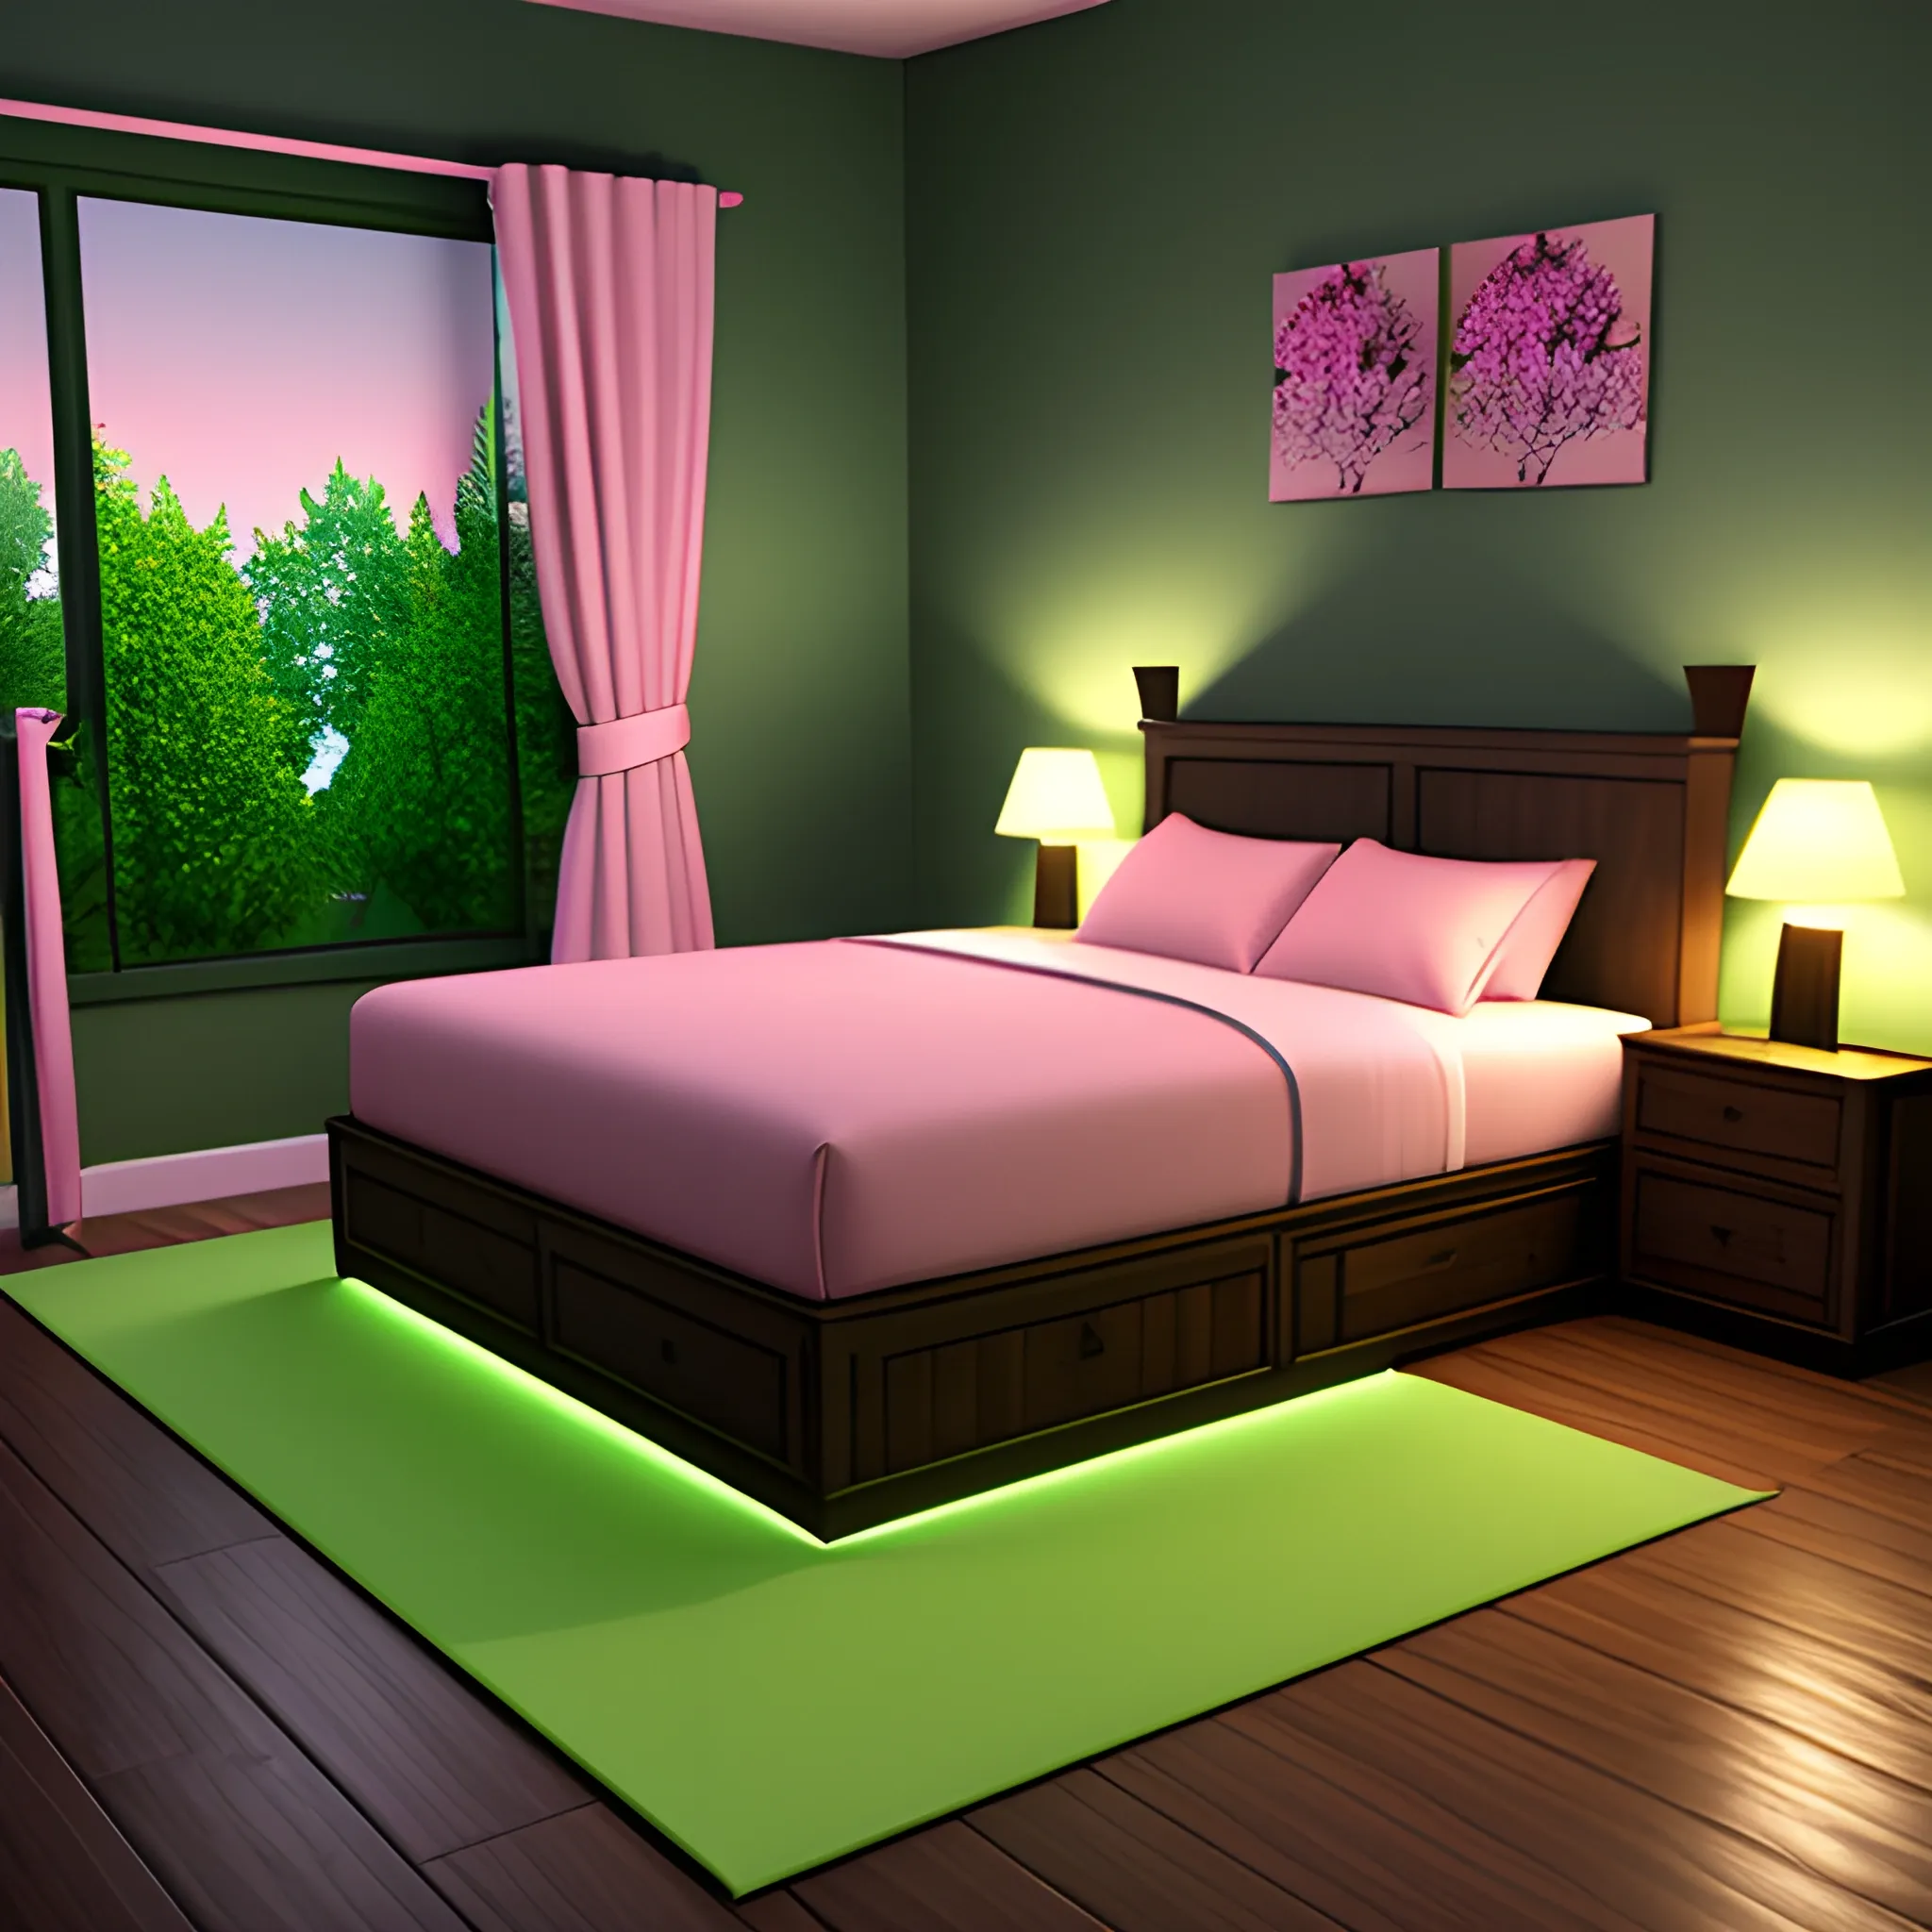 3d render, high resolution, cottage, small bedroom, green, pink sheets, night light, 14mm, cottage-core, small flowers, flower pot, night light, little stars, plants